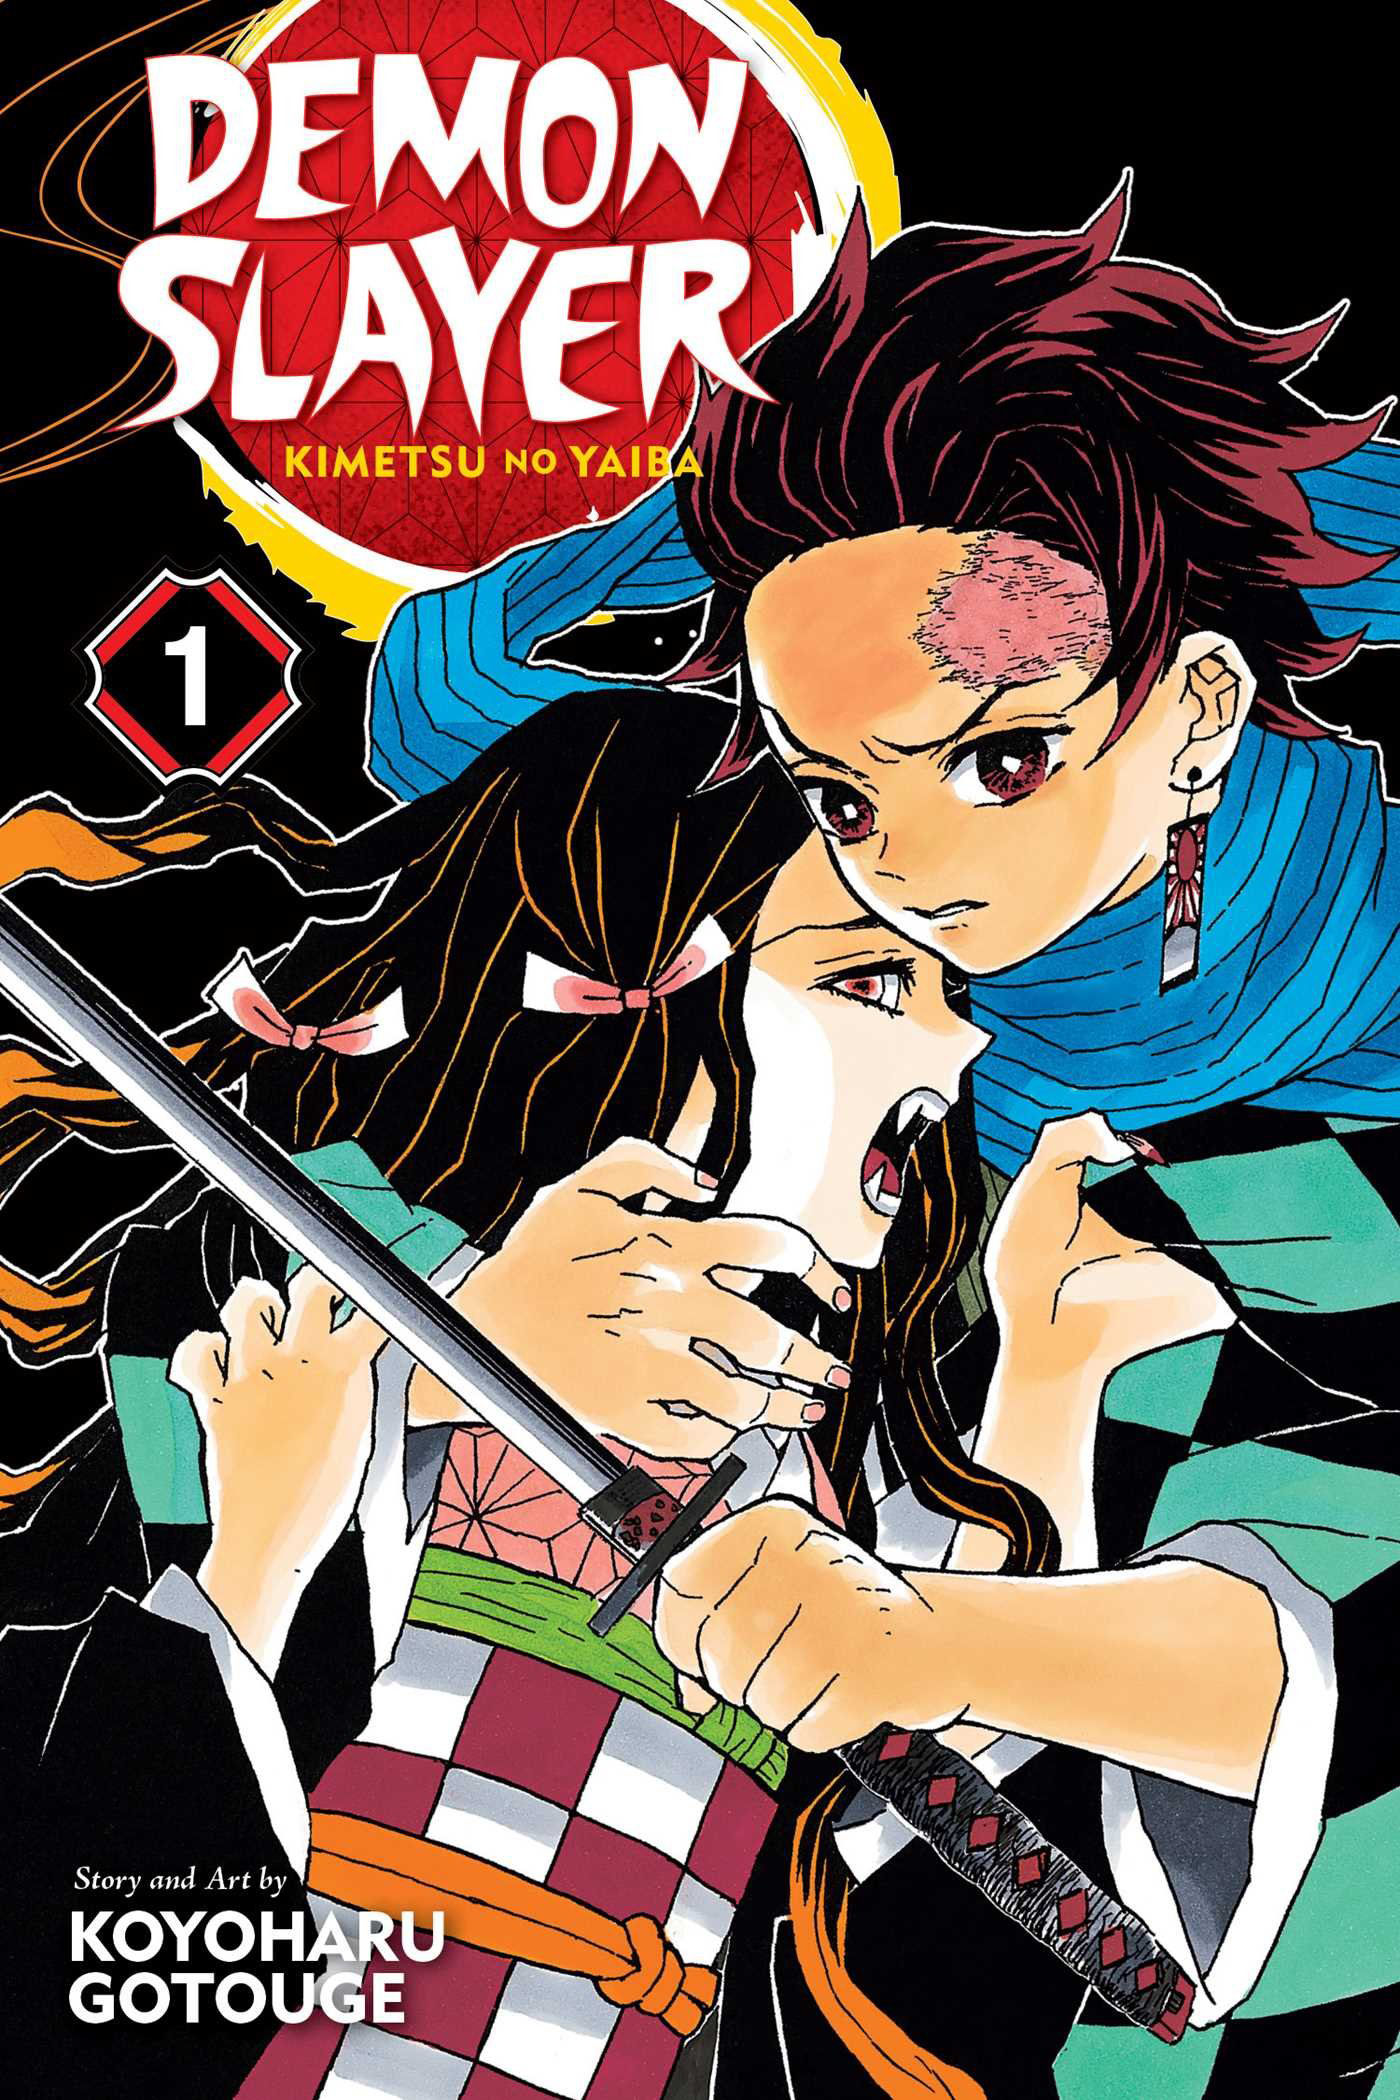 We already know the number of chapters that Demon Slayer season